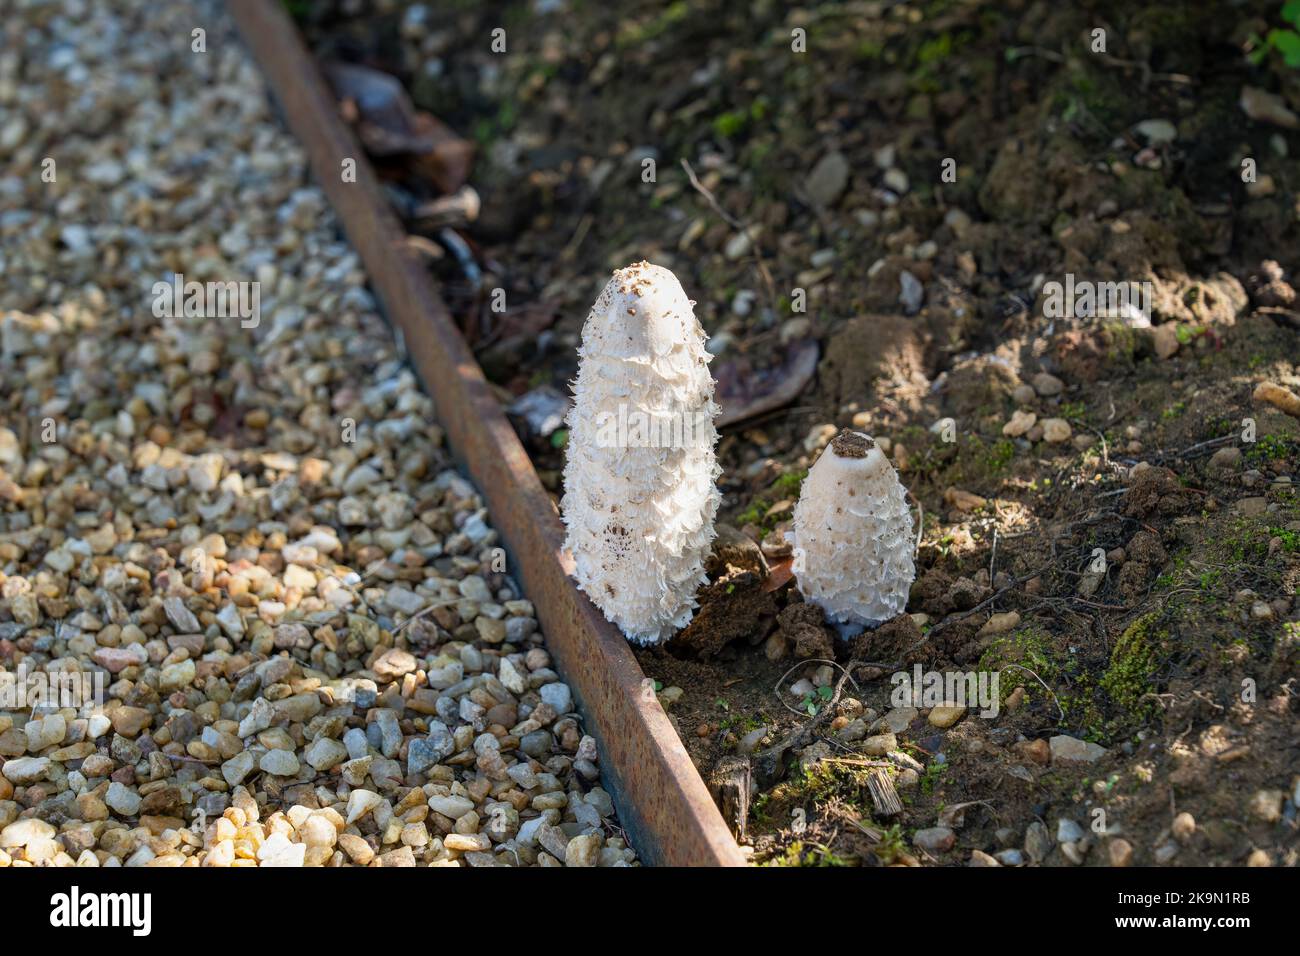 close up of a pair of young Shaggy Inkcap (Coprinus comatus or Lawyer's Wig) Stock Photo